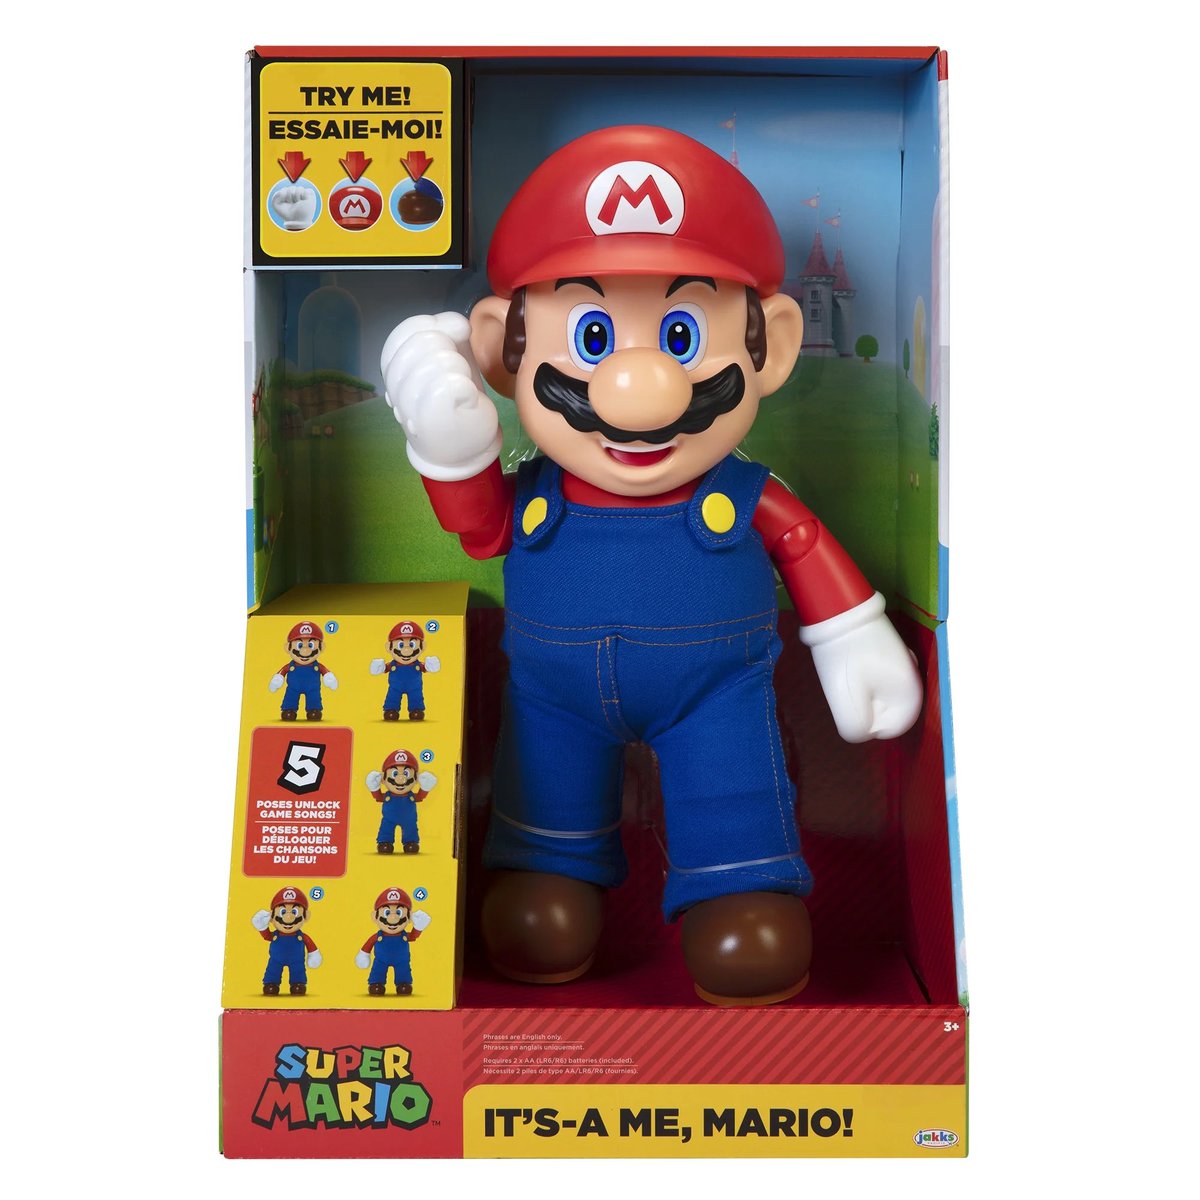 The box for the “It’s a Me, Mario!” figure.